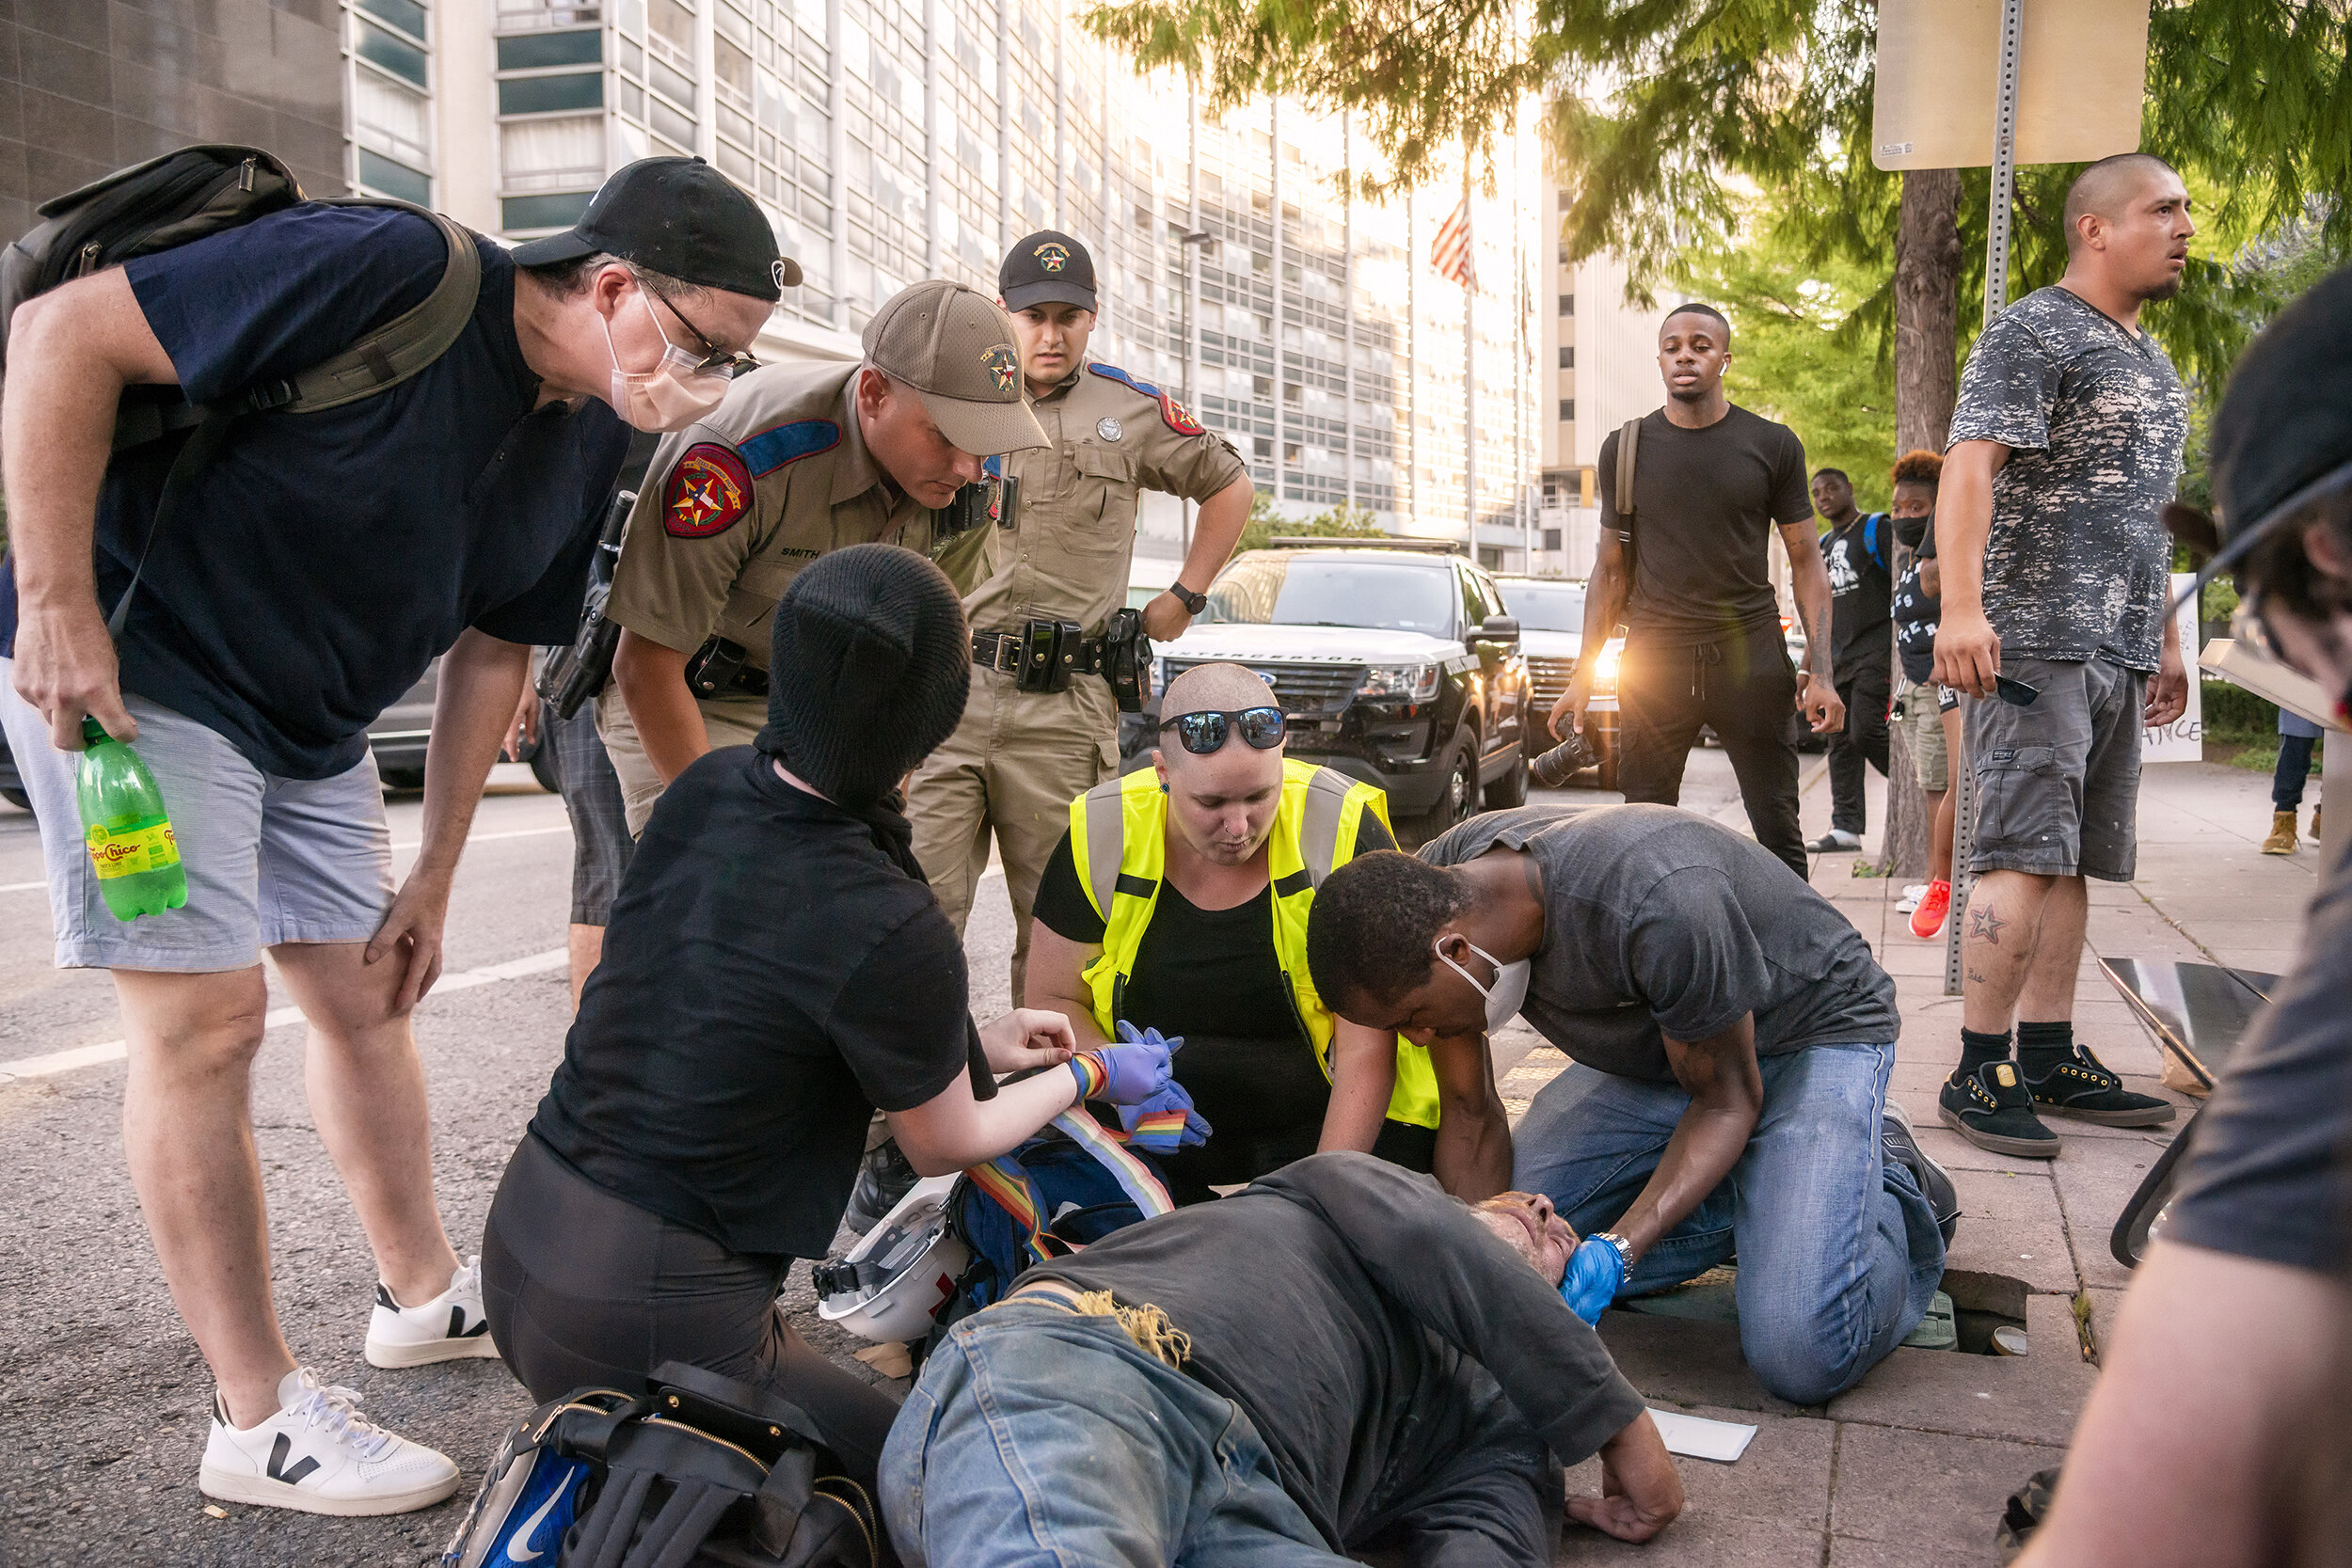  Law enforcement and anti-police brutality protesters work together to stabilize a man after a tangential assault left him unconscious and bleeding near Main Street Garden Park in Dallas, TX on June 6, 2020.  The unconscious man had been attacked and